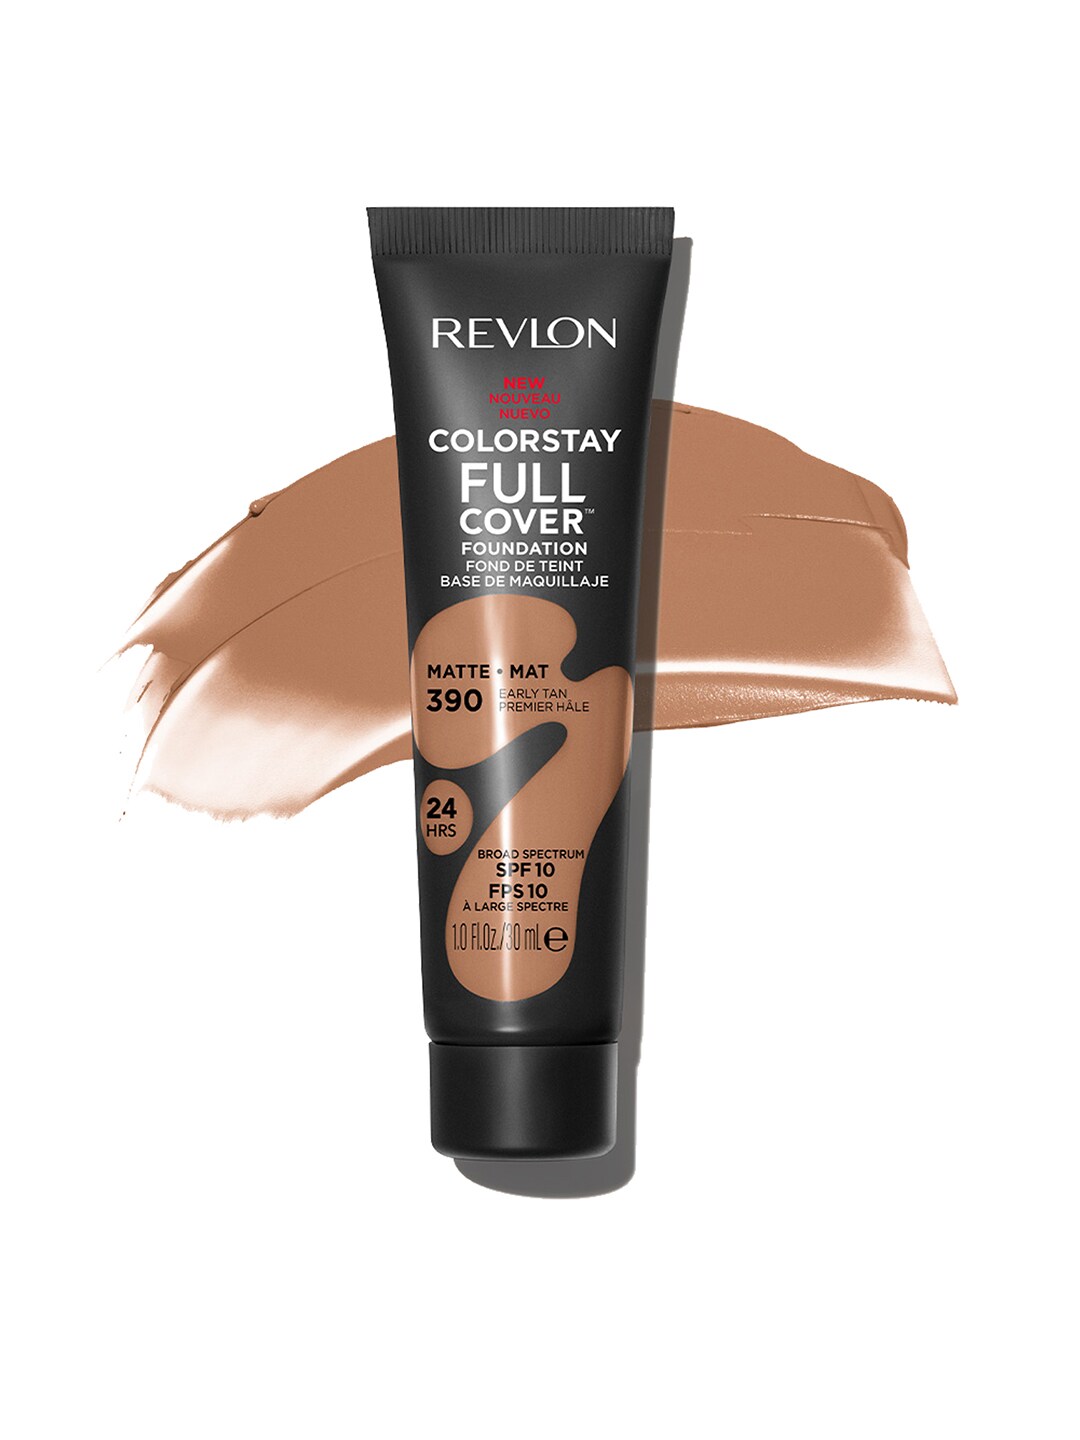 Revlon Colorstay Full Cover Foundation - Early Tan 390 Price in India